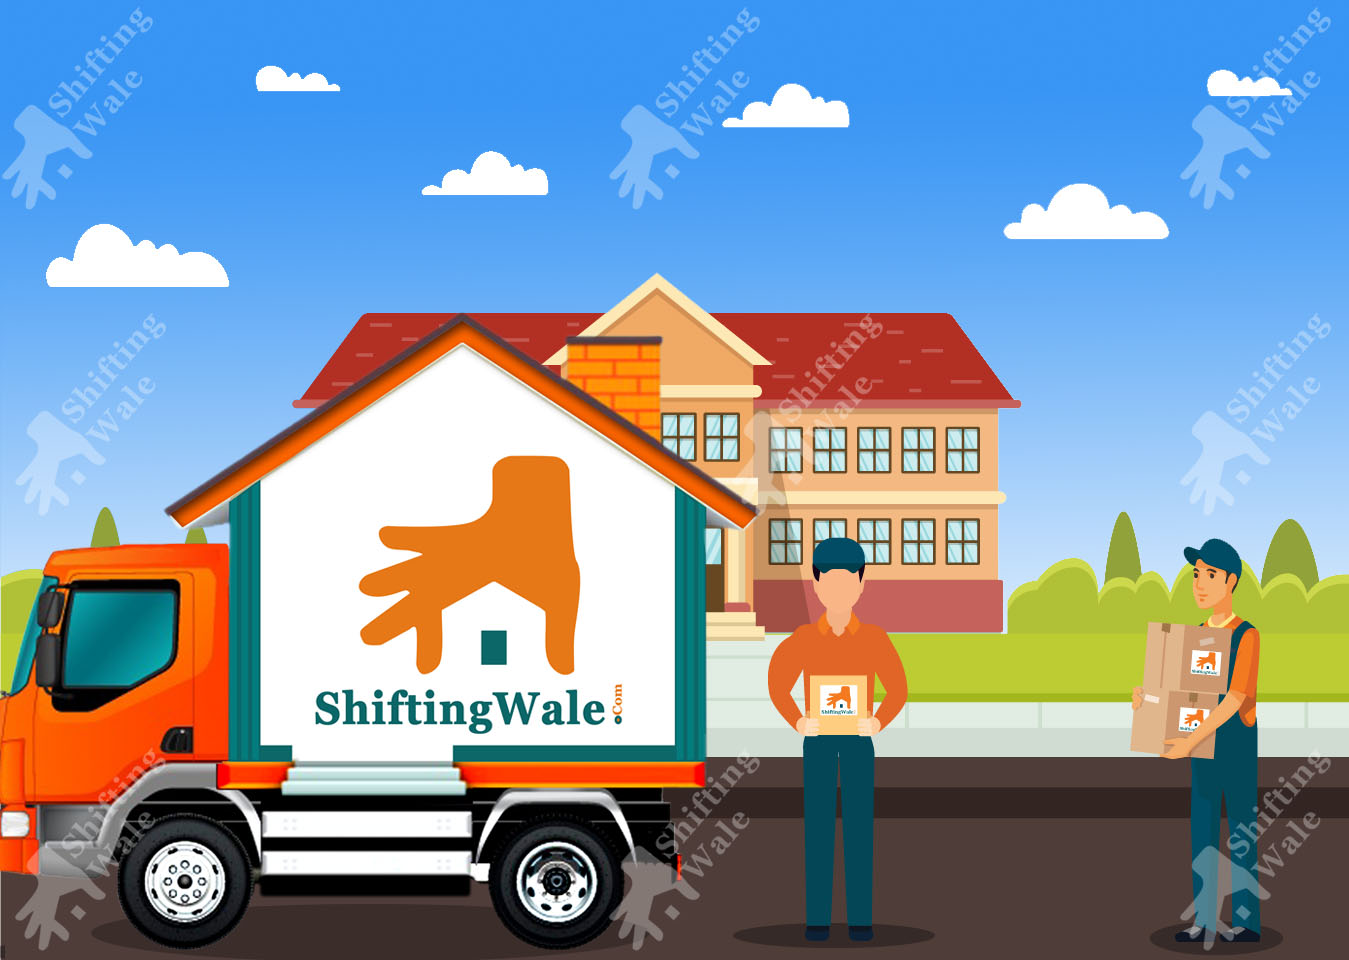 ShiftingWale Providing Best Moving Services Across India And Nepal